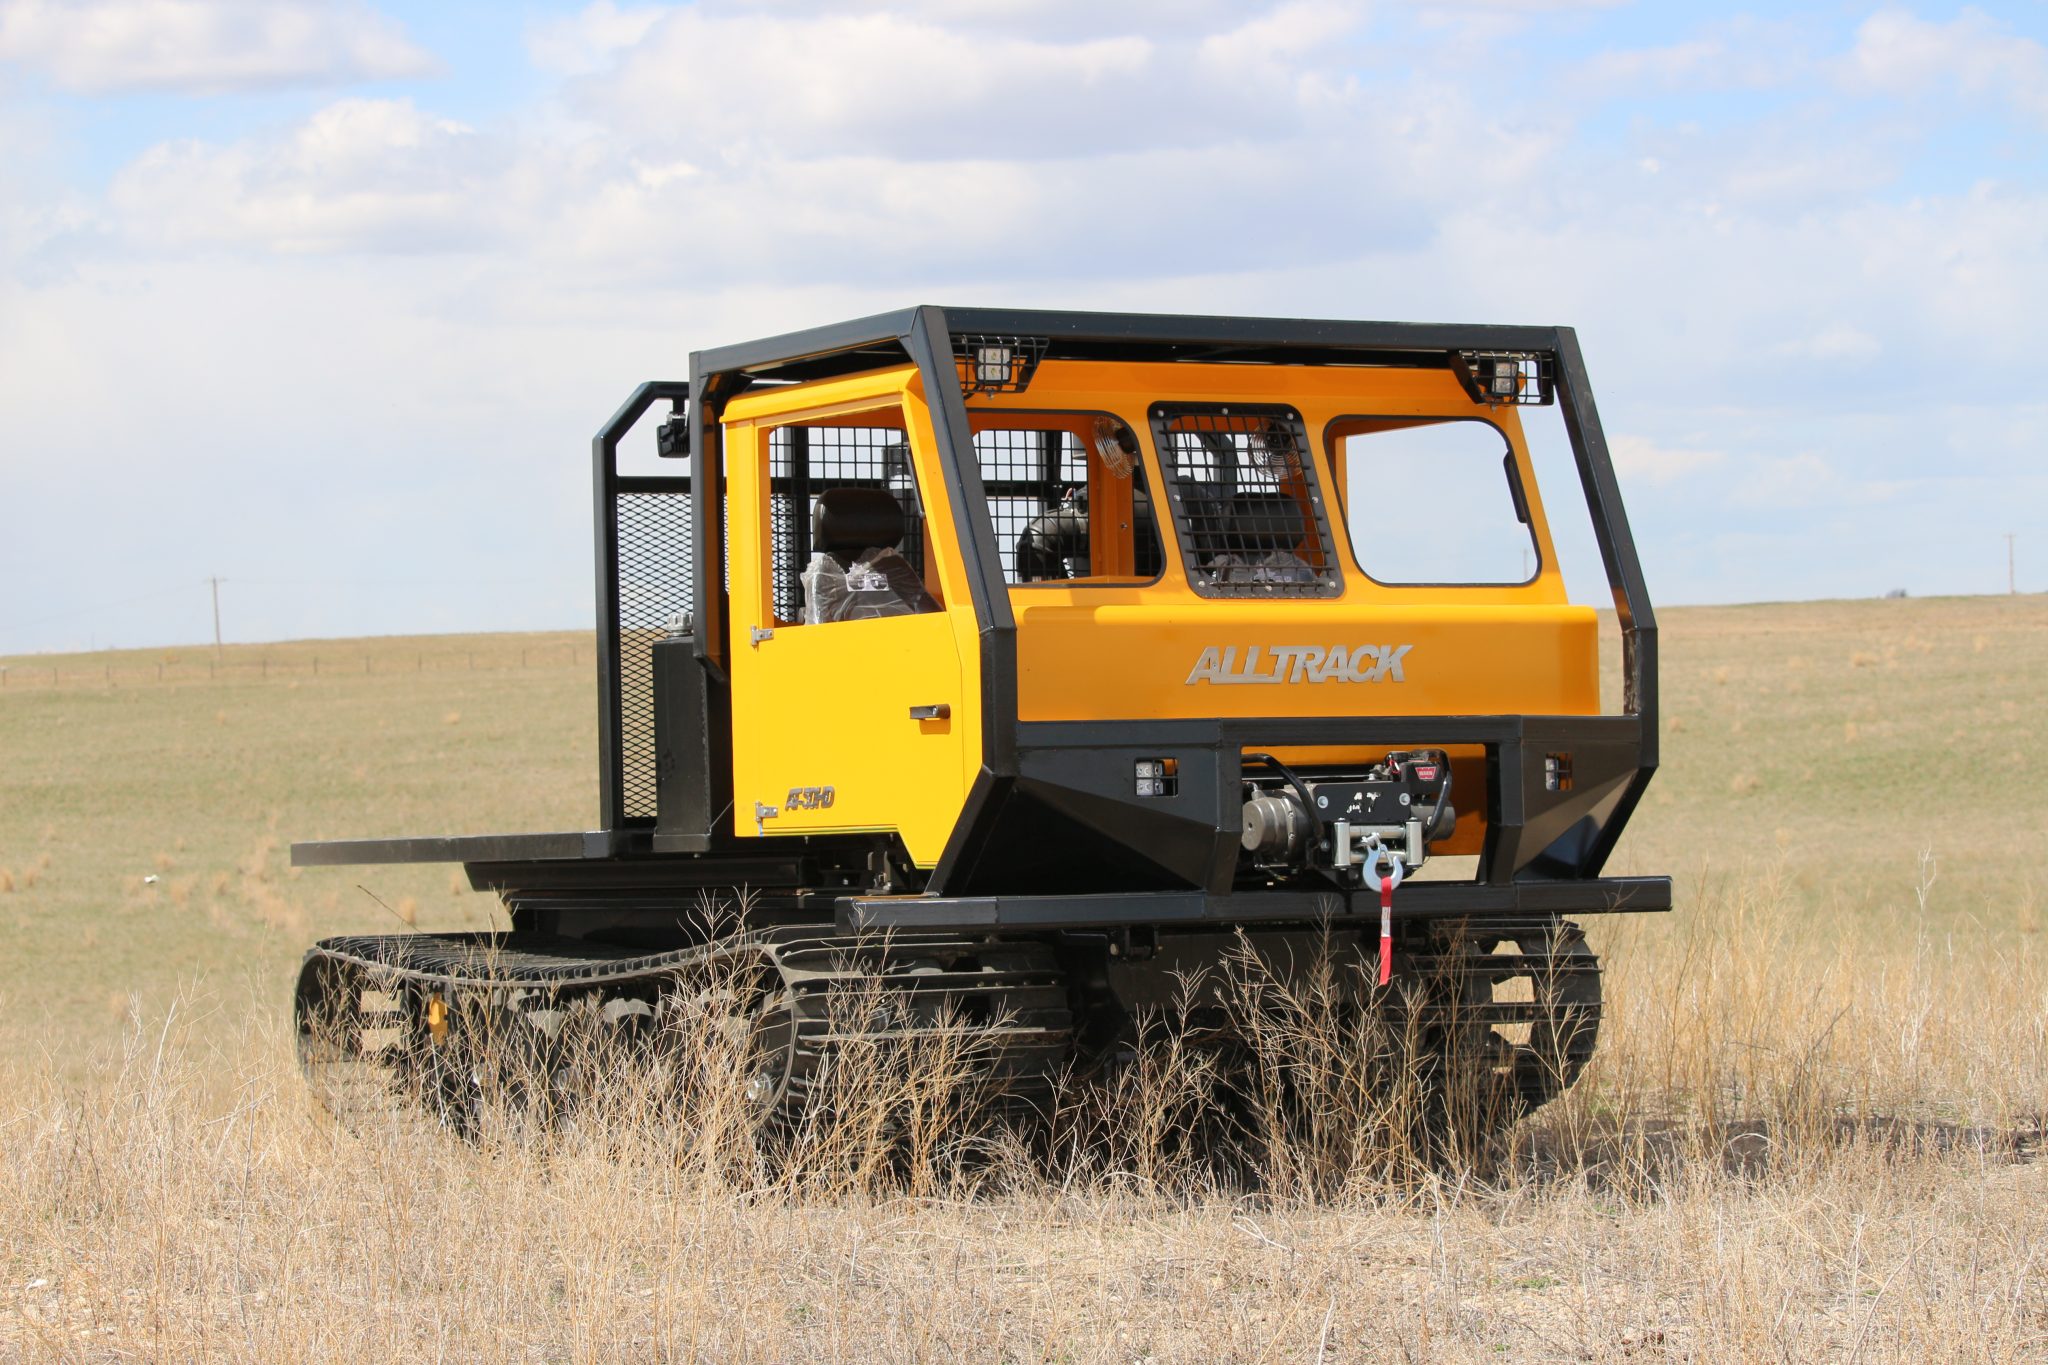 AT-50HD Brushtrack Tracked Vehicle wildland fire suppression